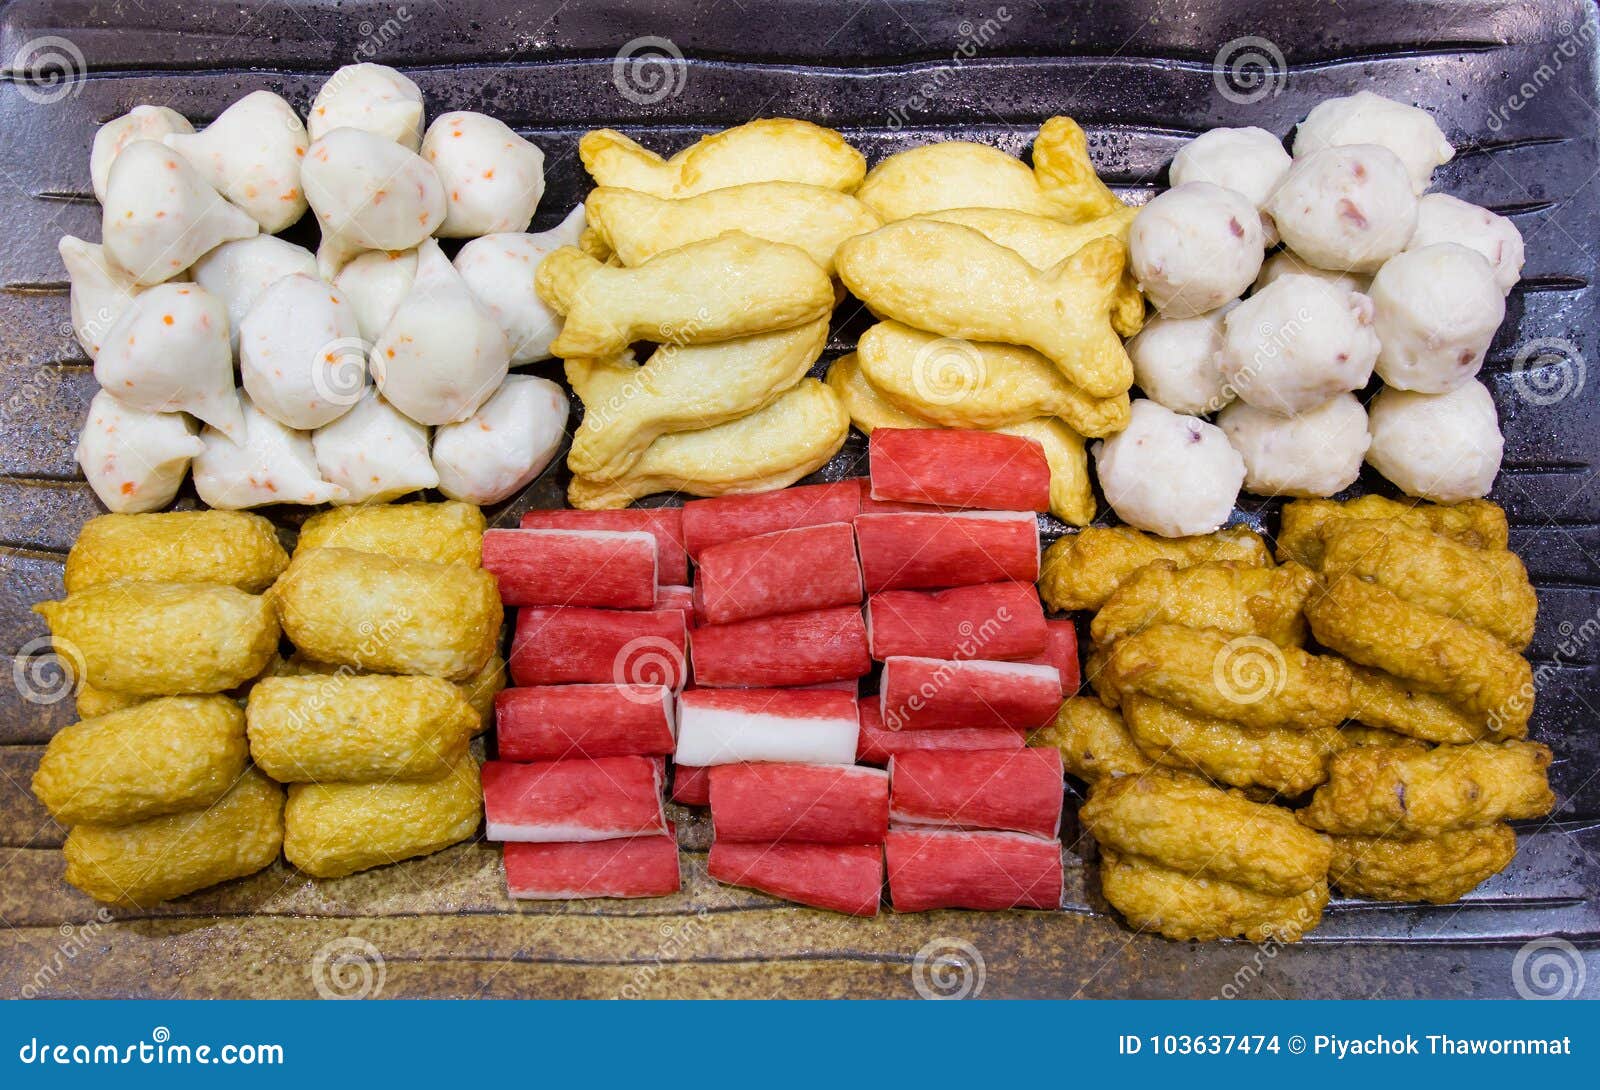 Mix Asian Seafood Appetizers Dish. Stock Photo - Image of streamed